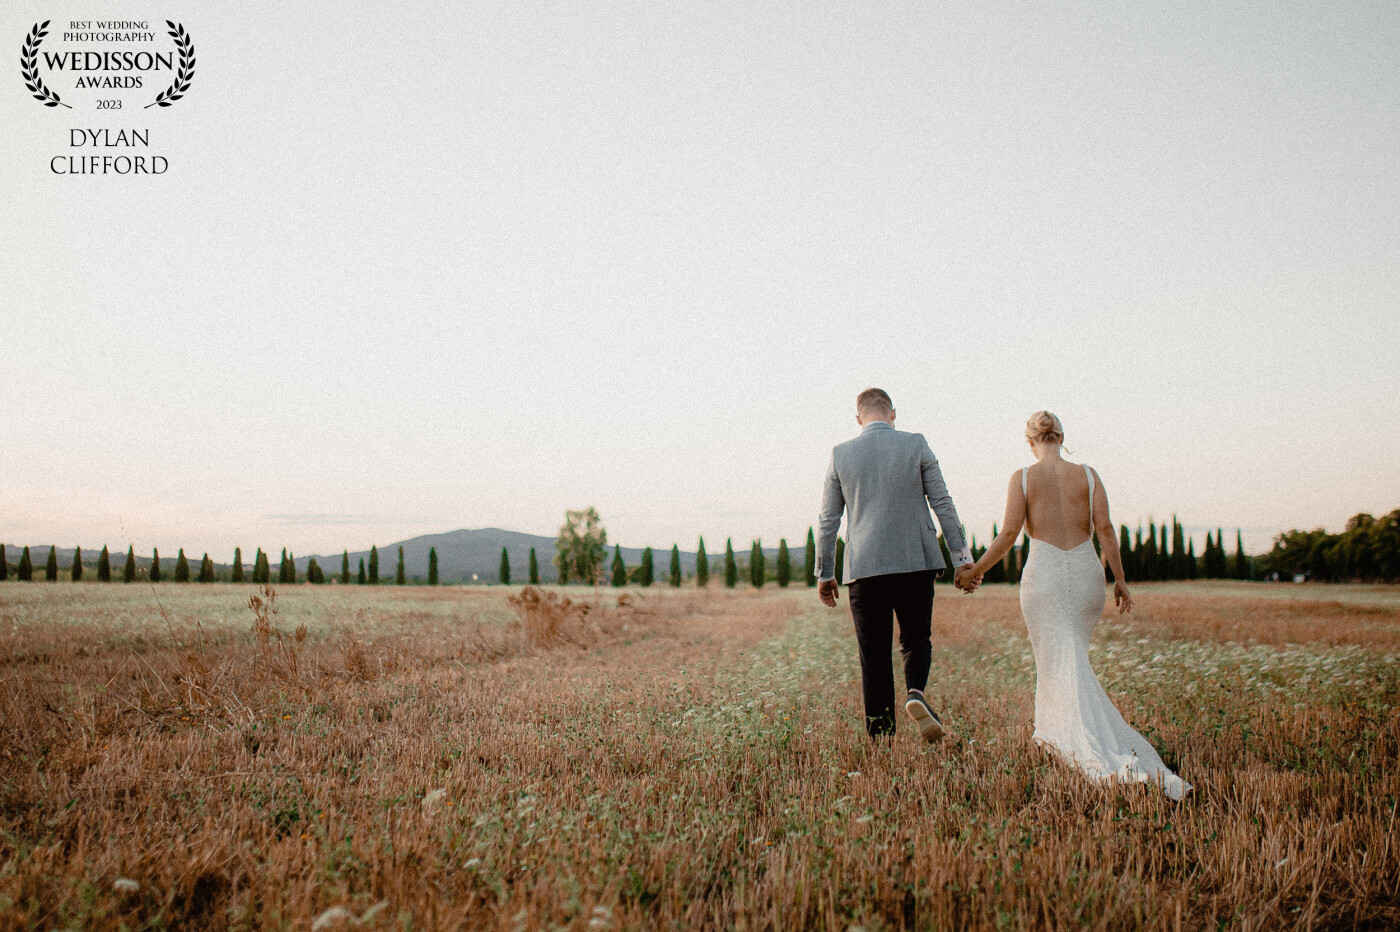 Jenny and Dean as newly weds walking the fields of Tuscany.